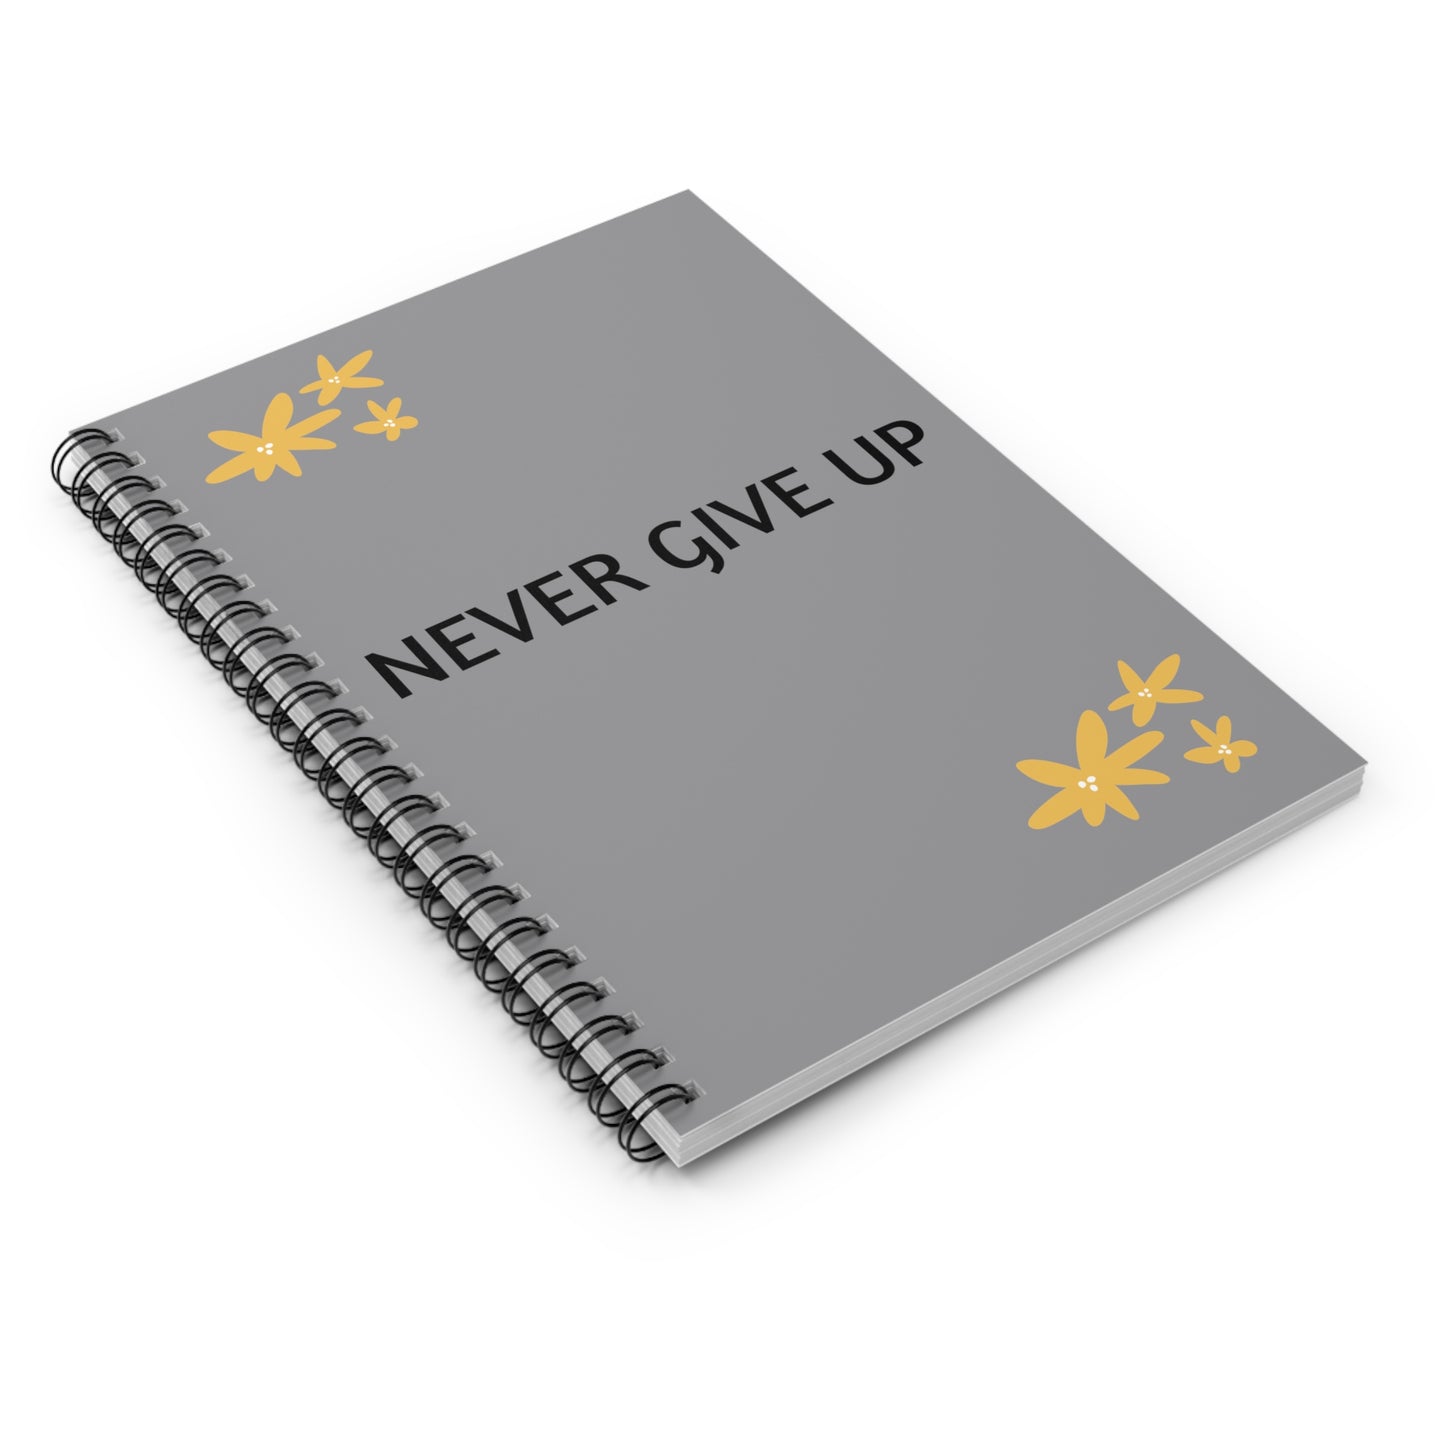 Never Give Up - Spiral Notebook - Ruled Line